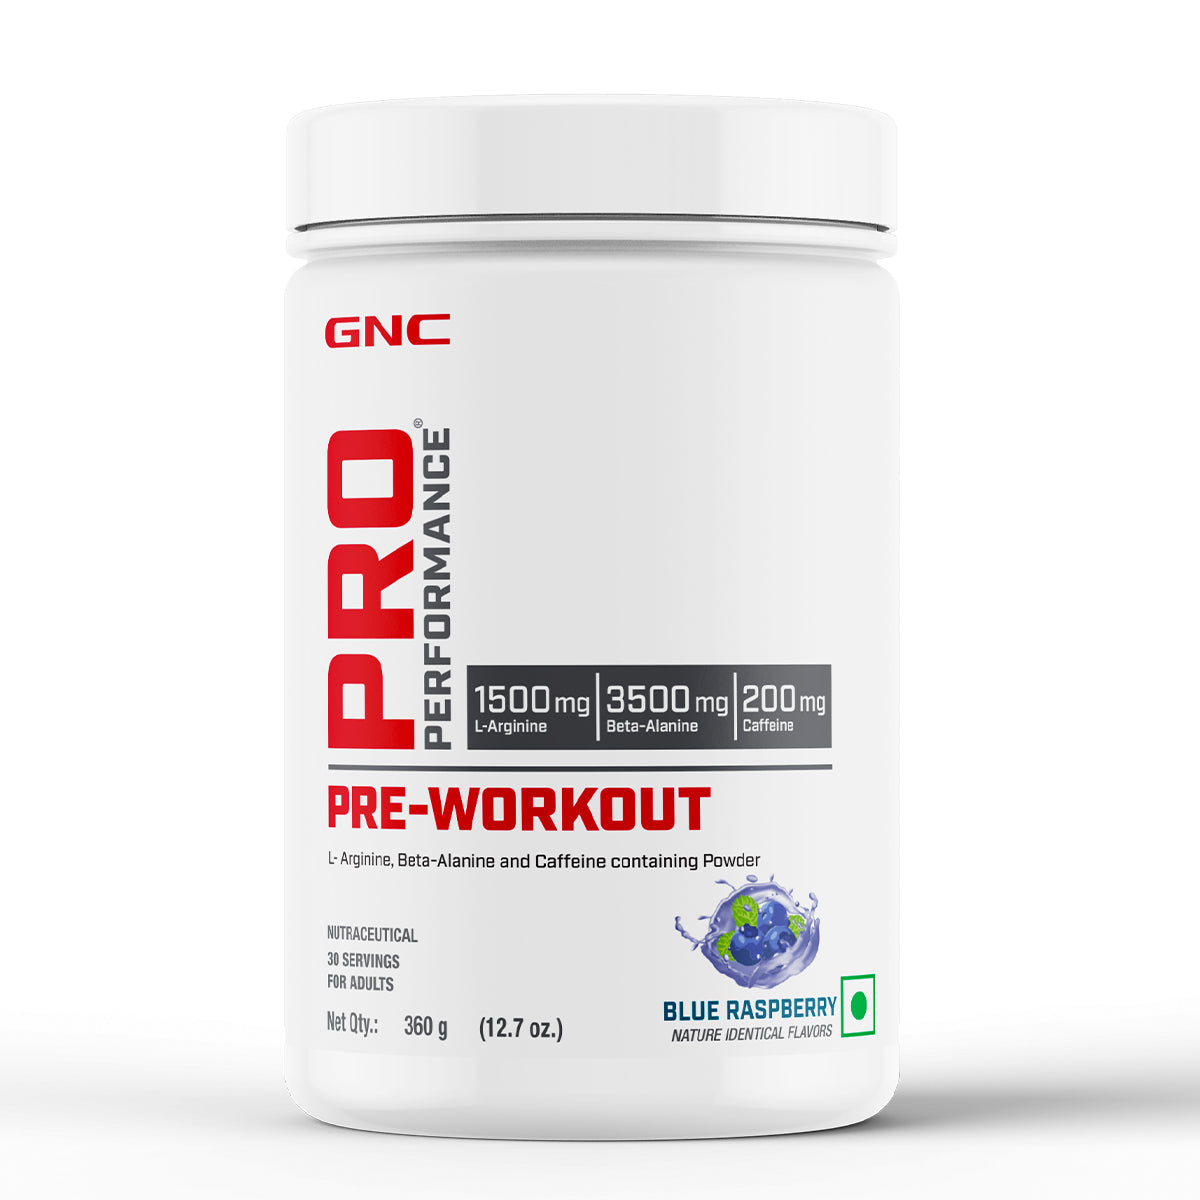 Advanced stack - Boosts Athletic Strength | Boosts Energy, Focus & Immunity | Maintains Healthy Cholesterol